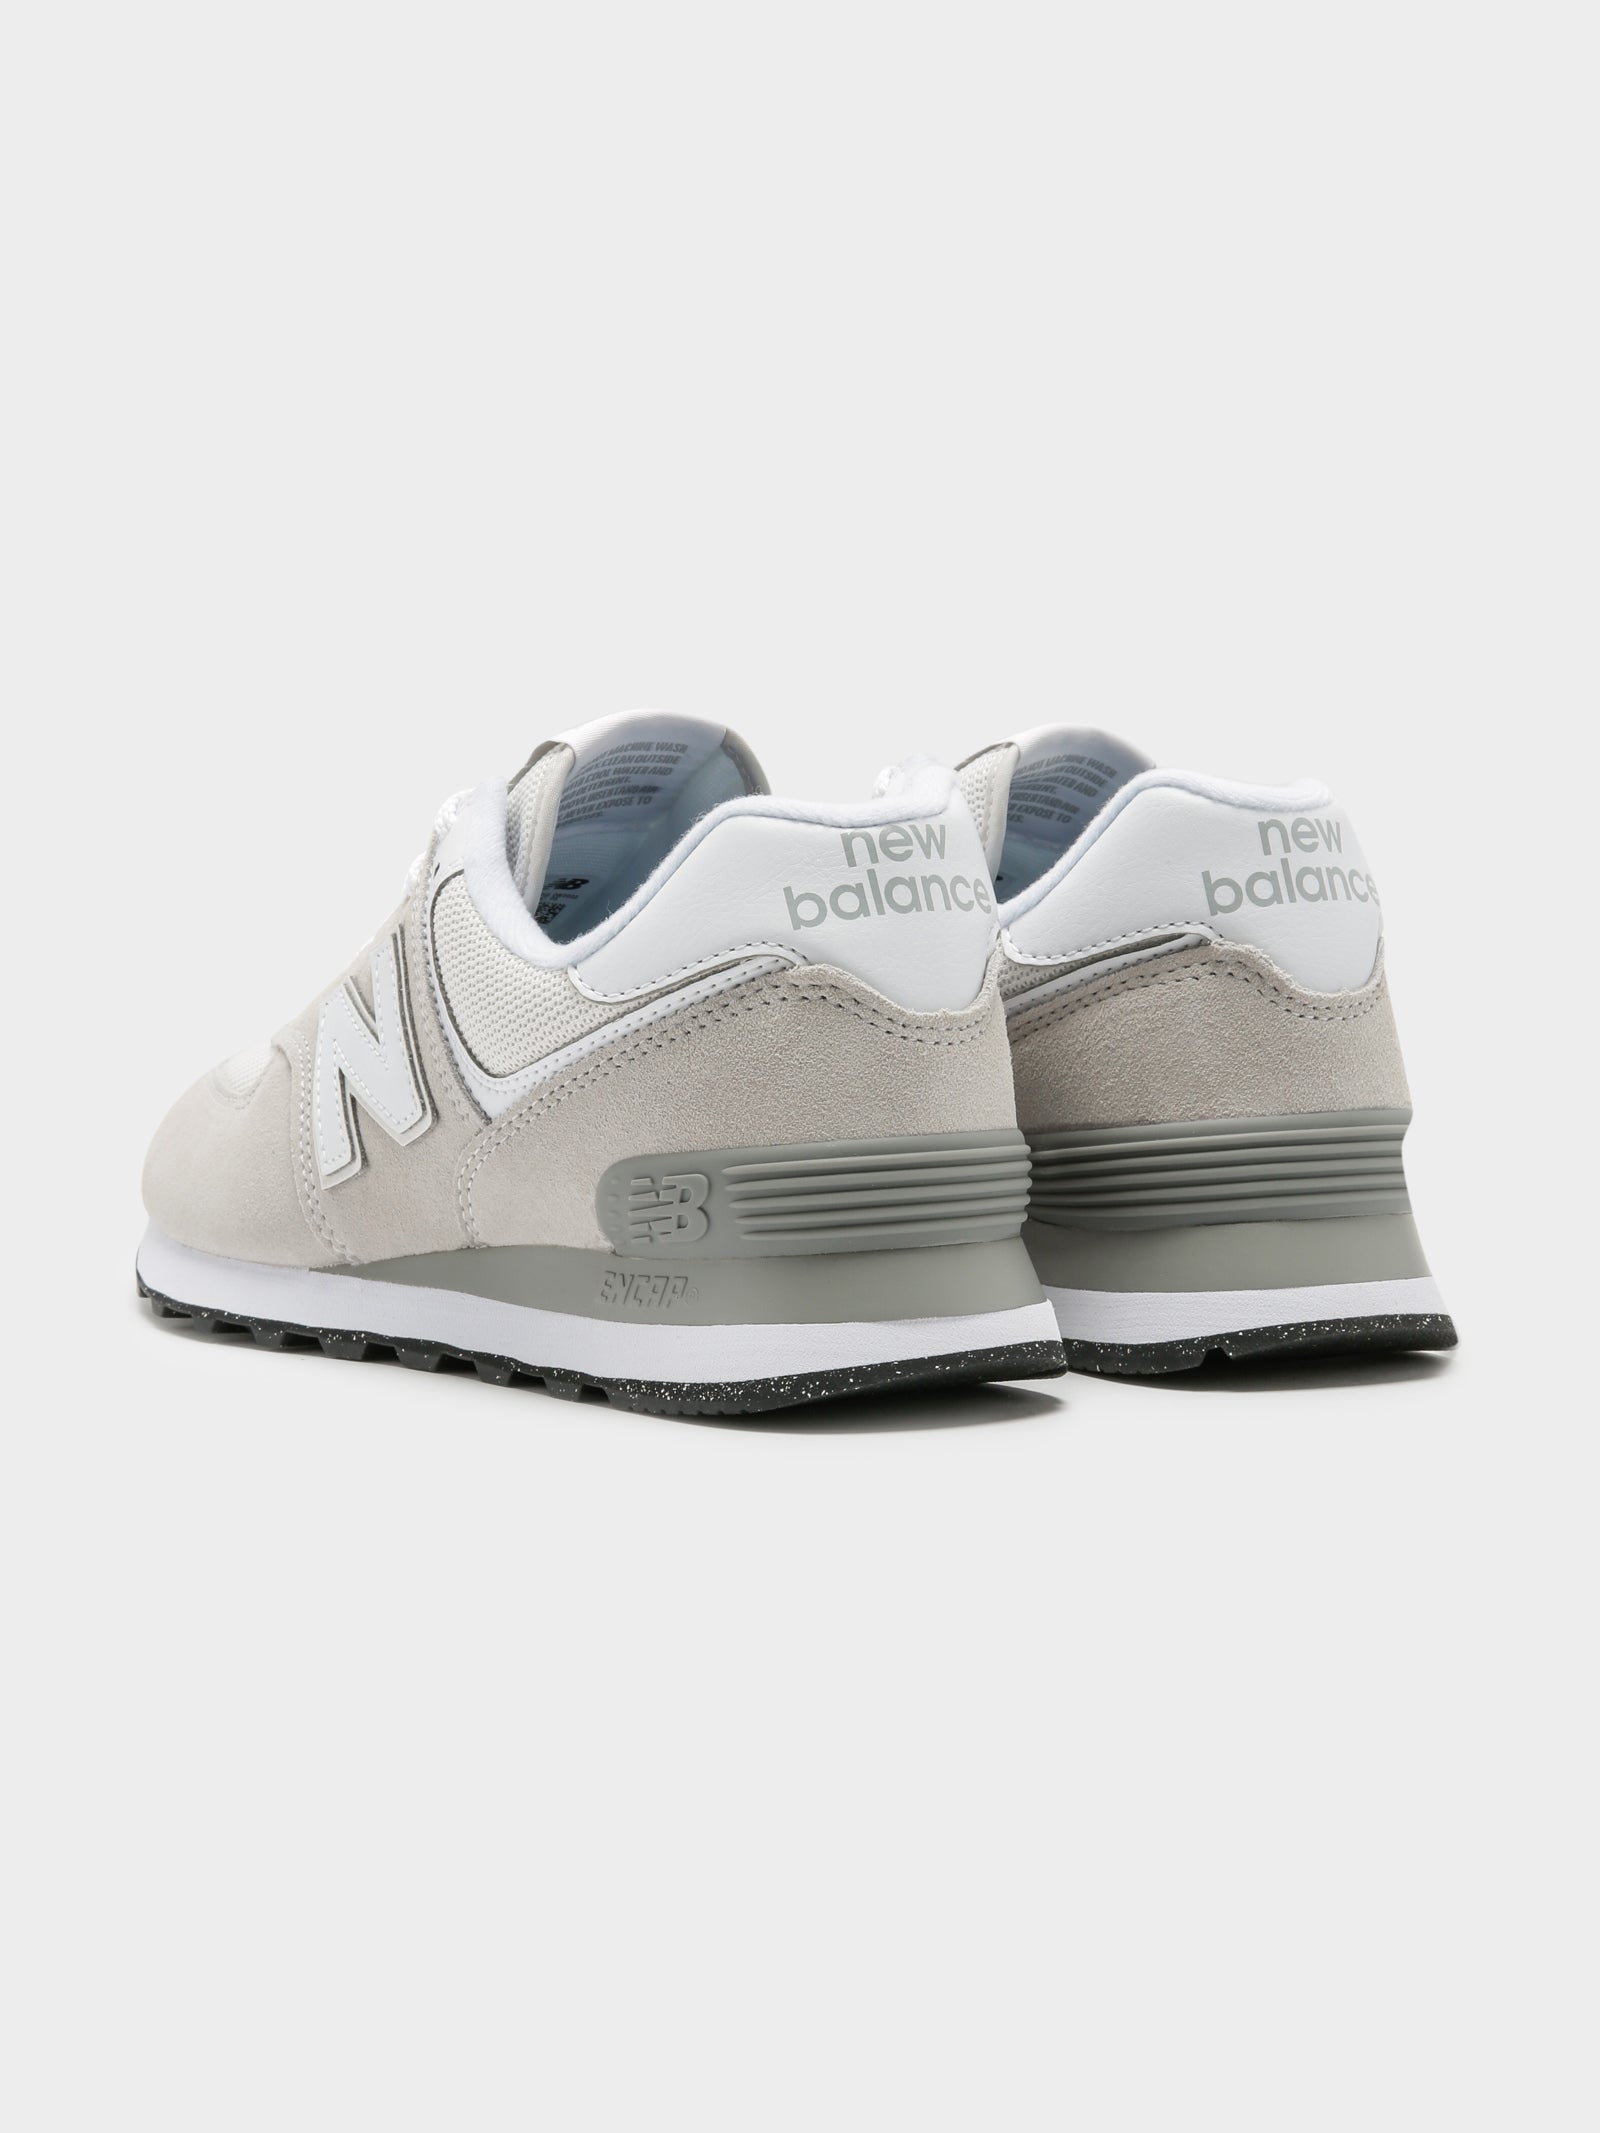 Womens 574 Sneakers in Grey & White